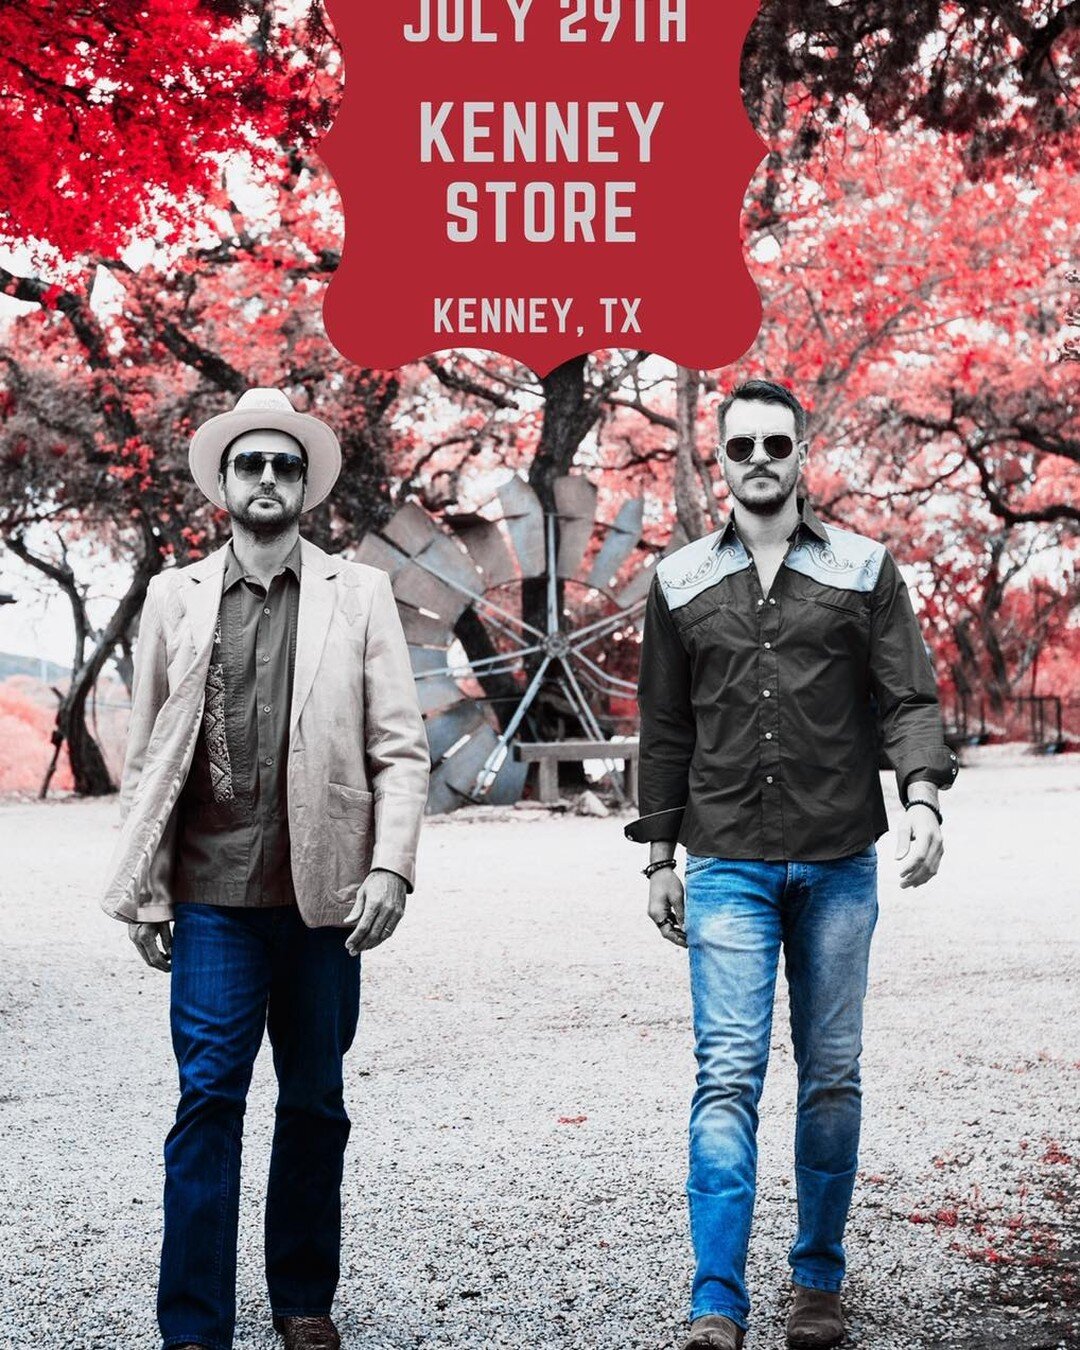 Come join us this Friday night at The Kenney Store in Kenney, TX! 

https://www.thekenneystore.com/events/the-statesboro-revue